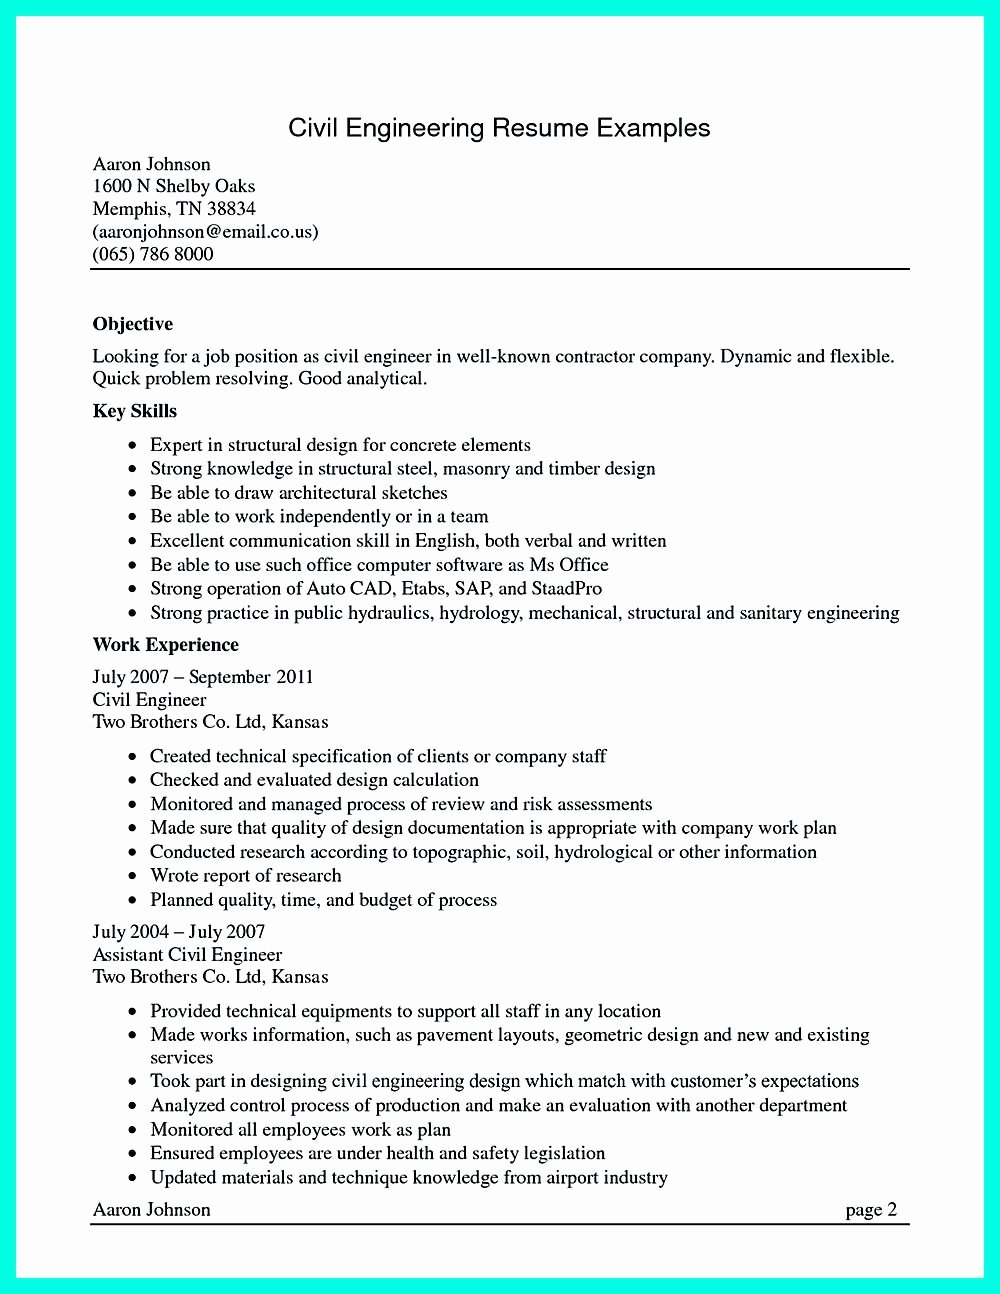 There are so Many Civil Engineering Resume Samples You Can